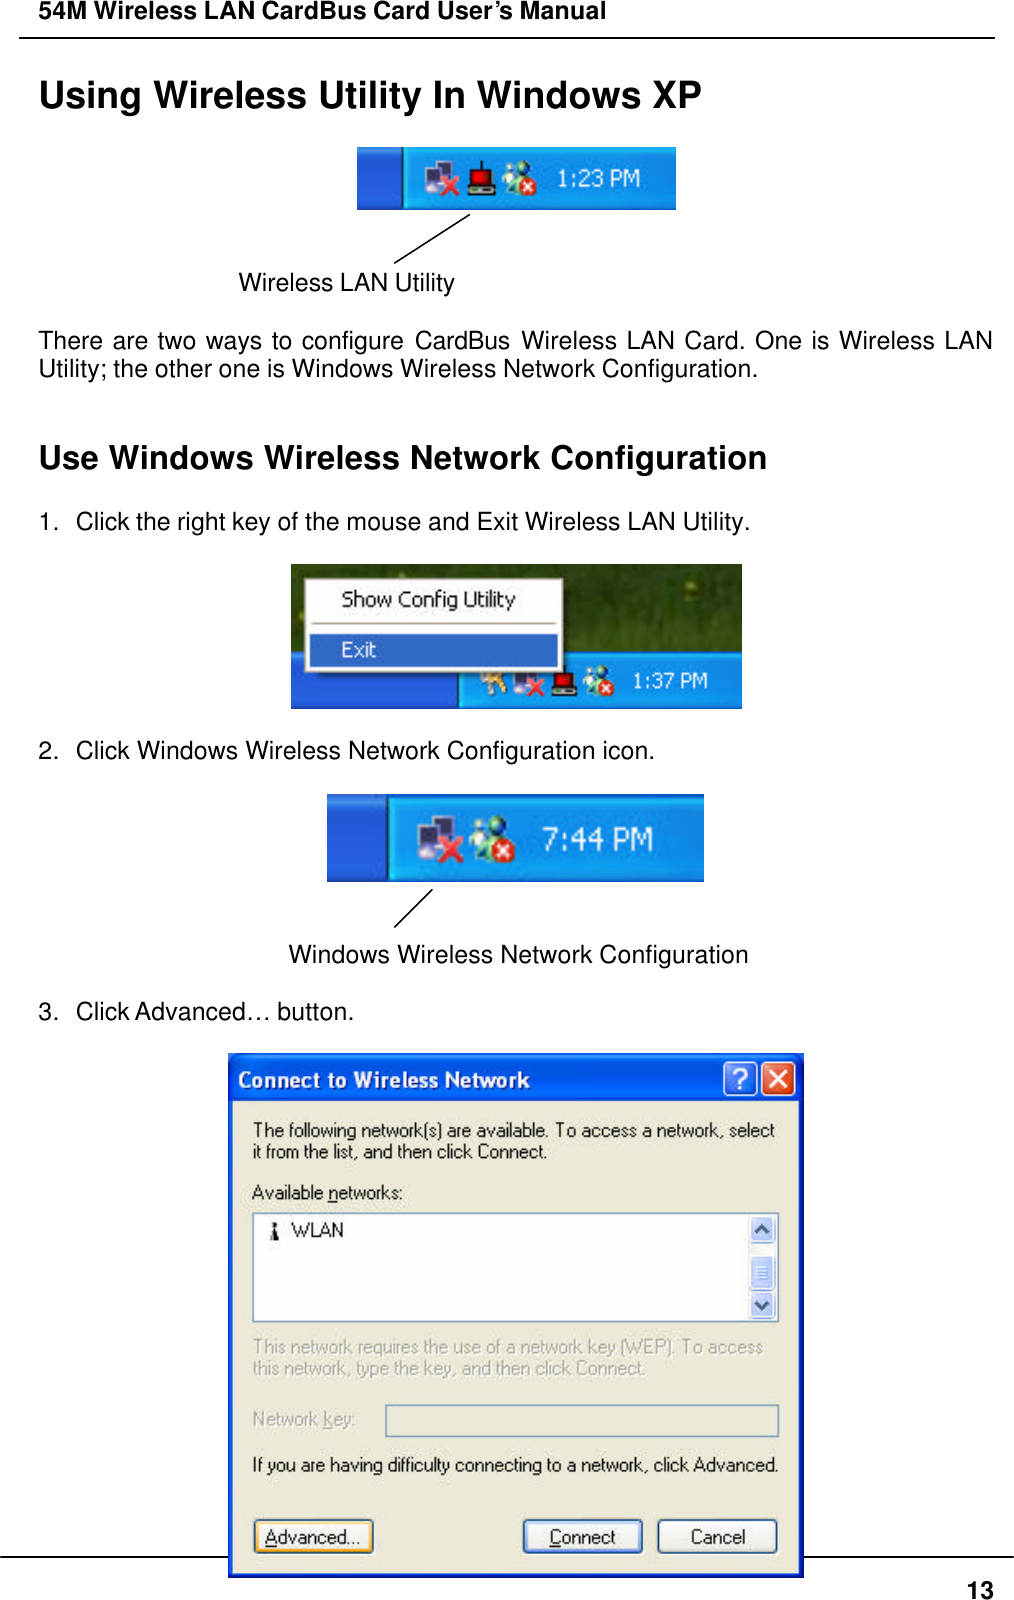 54M Wireless LAN CardBus Card User’s Manual  13 Using Wireless Utility In Windows XP     Wireless LAN Utility    There are two ways to configure CardBus Wireless LAN Card. One is Wireless LAN Utility; the other one is Windows Wireless Network Configuration.   Use Windows Wireless Network Configuration  1. Click the right key of the mouse and Exit Wireless LAN Utility.    2. Click Windows Wireless Network Configuration icon.     Windows Wireless Network Configuration  3. Click Advanced…  button.   